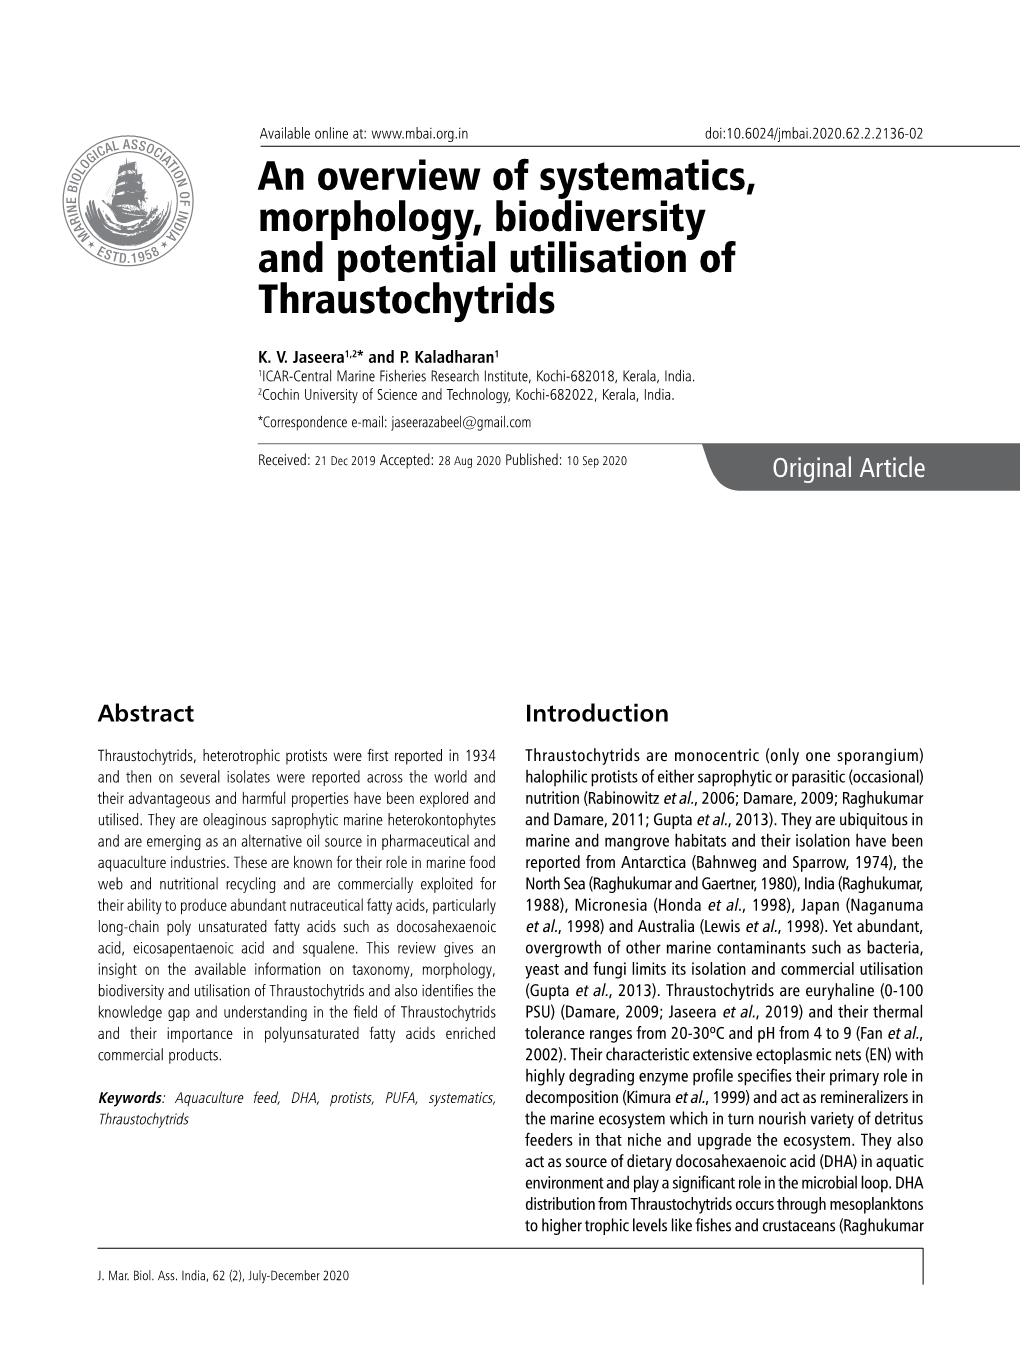 An Overview of Systematics, Morphology, Biodiversity and Potential Utilisation of Thraustochytrids